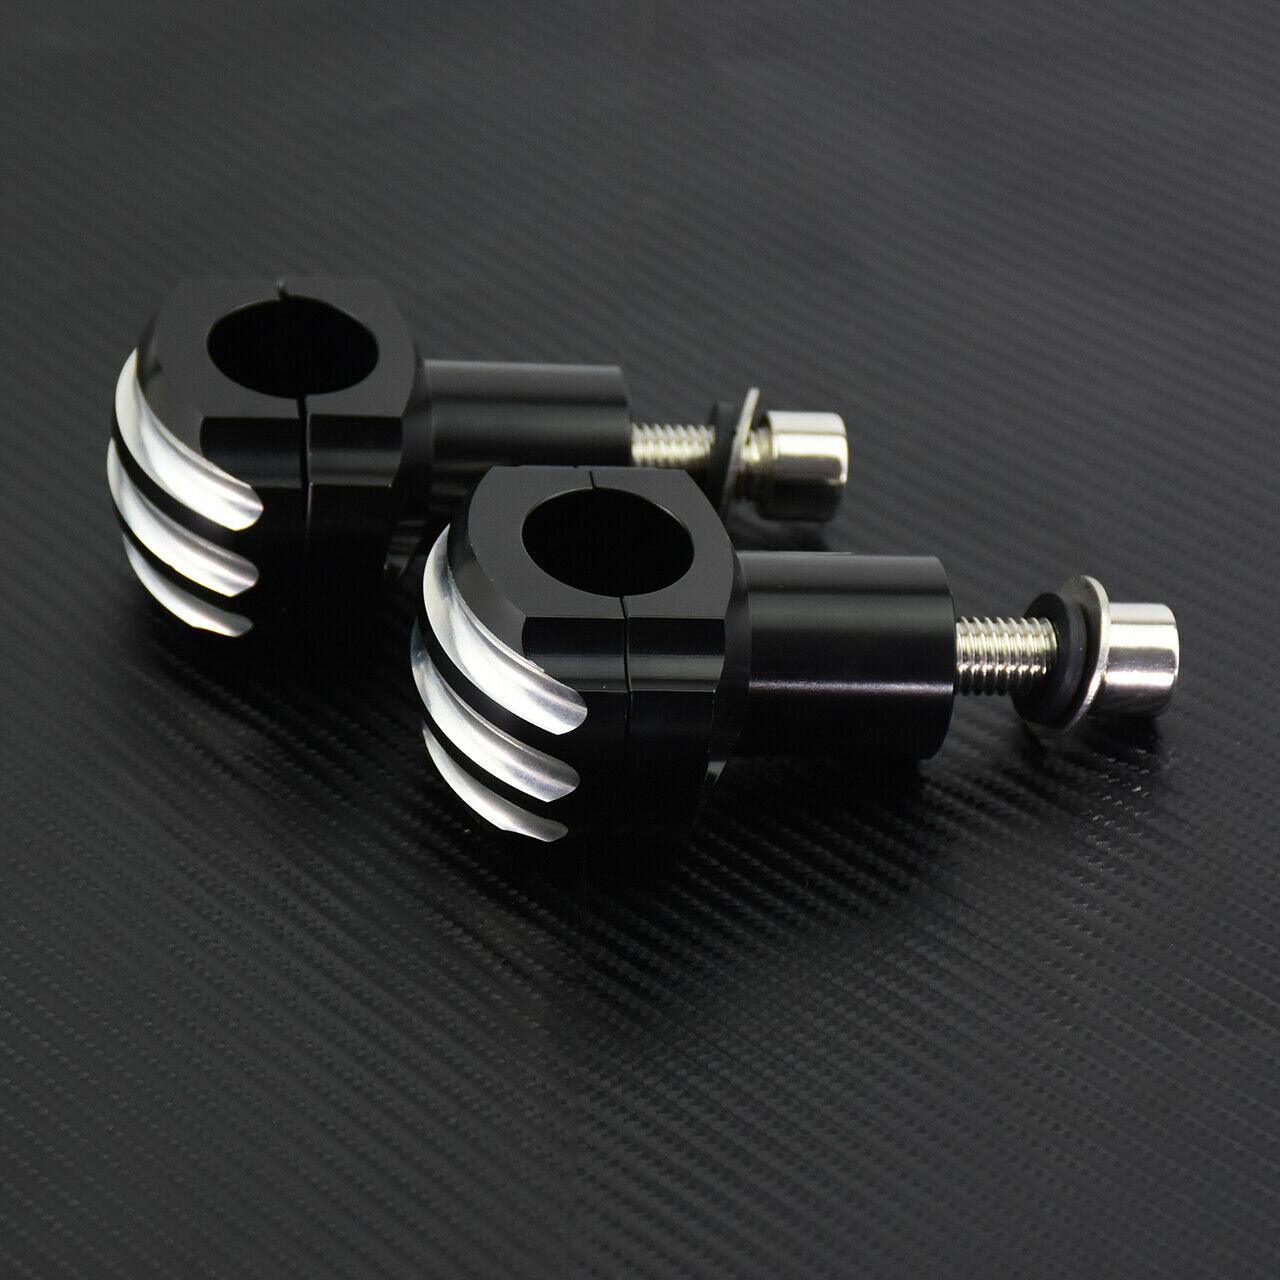 Cut Motorcycle 1" Handlebar Riser Fit For Harley Sportster Softail Touring Dyna - Moto Life Products